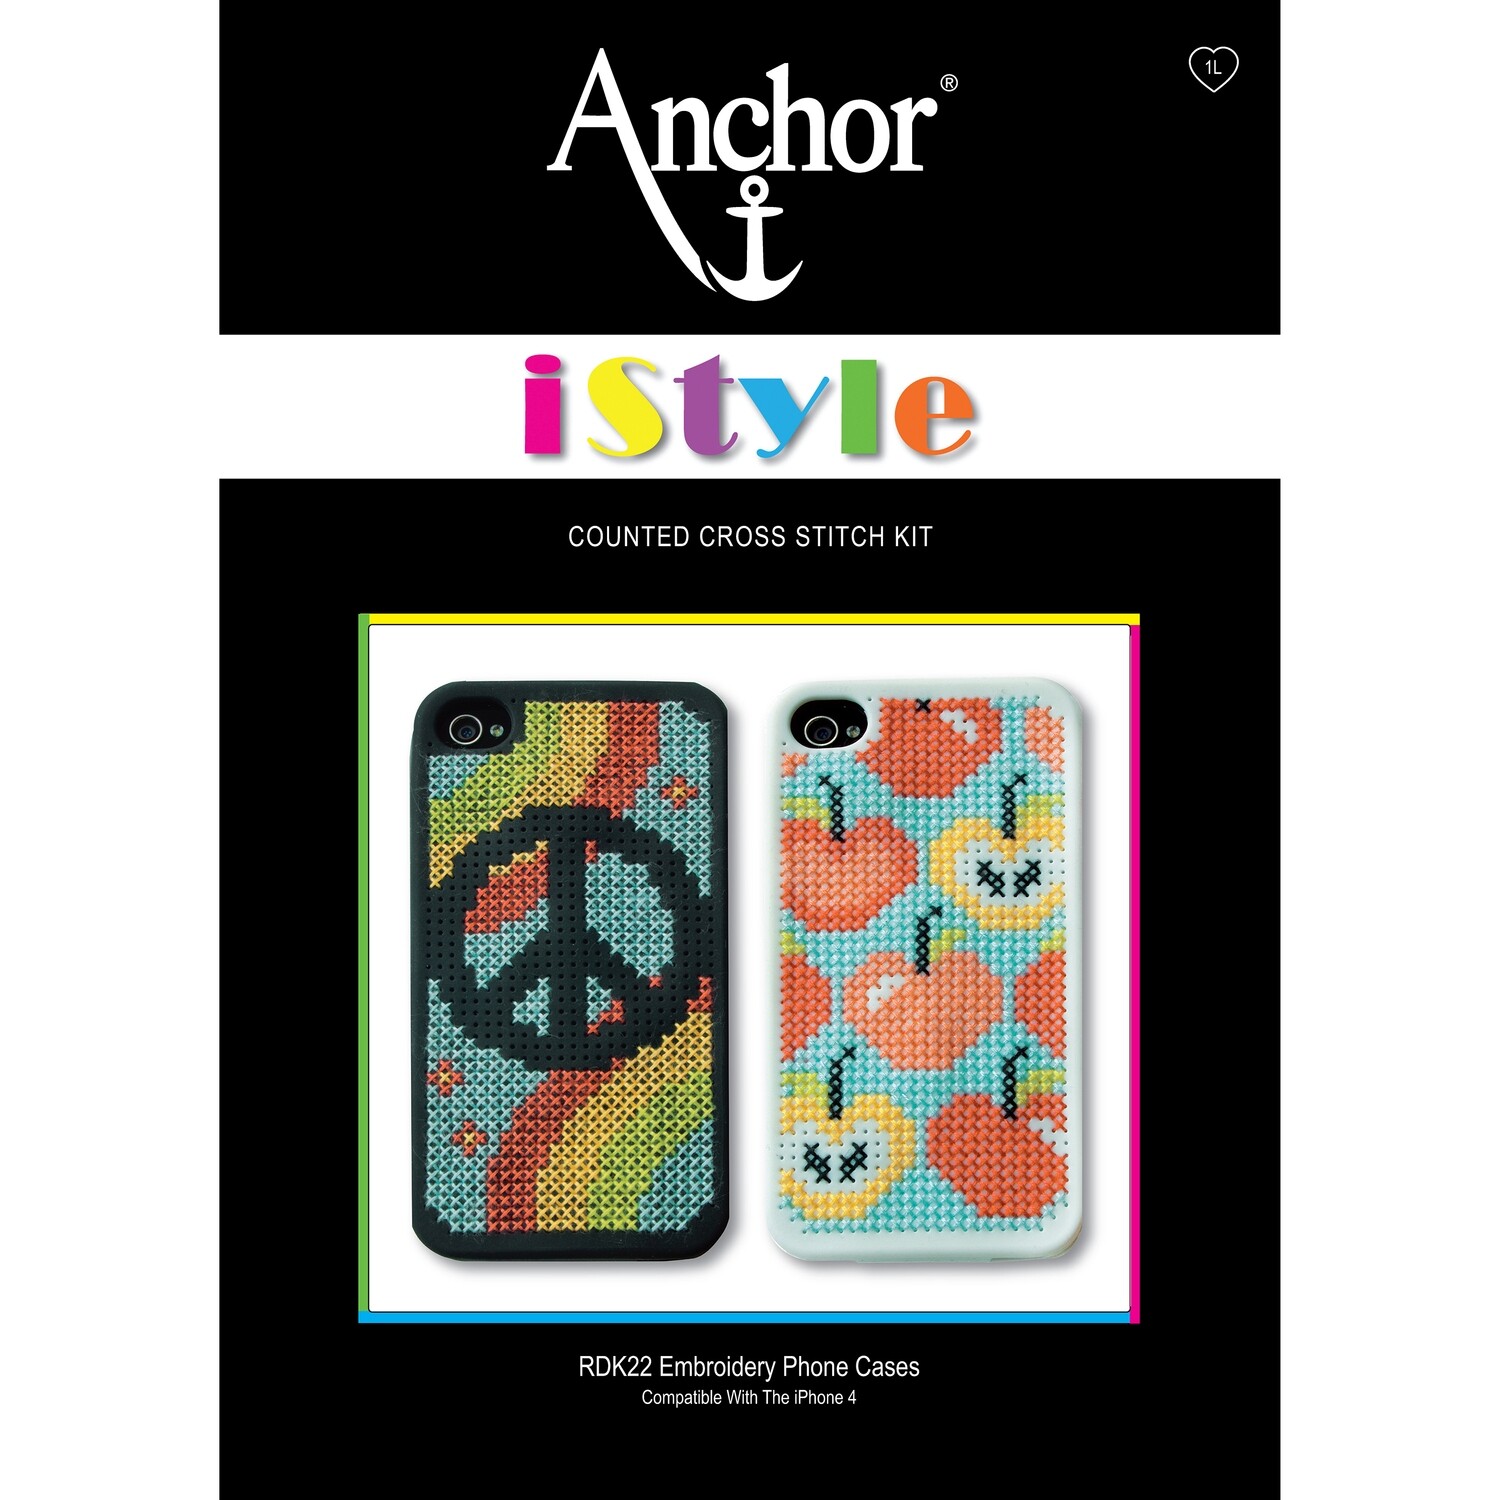 Anchor iStyle - XS iPhone 4 - Cases